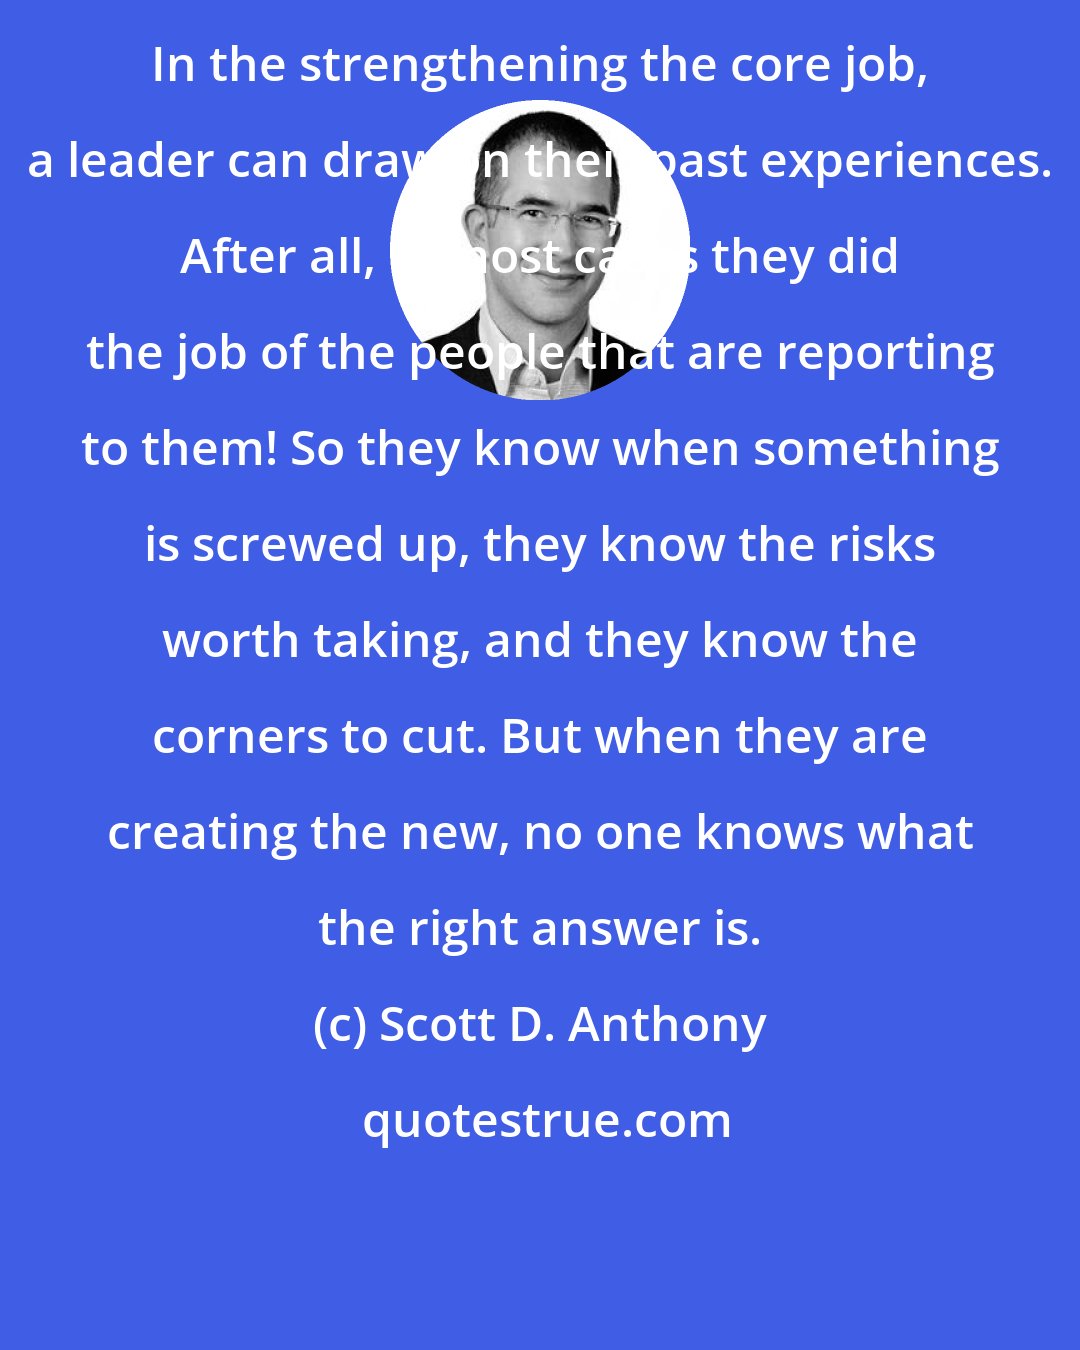 Scott D. Anthony: In the strengthening the core job, a leader can draw on their past experiences. After all, in most cases they did the job of the people that are reporting to them! So they know when something is screwed up, they know the risks worth taking, and they know the corners to cut. But when they are creating the new, no one knows what the right answer is.